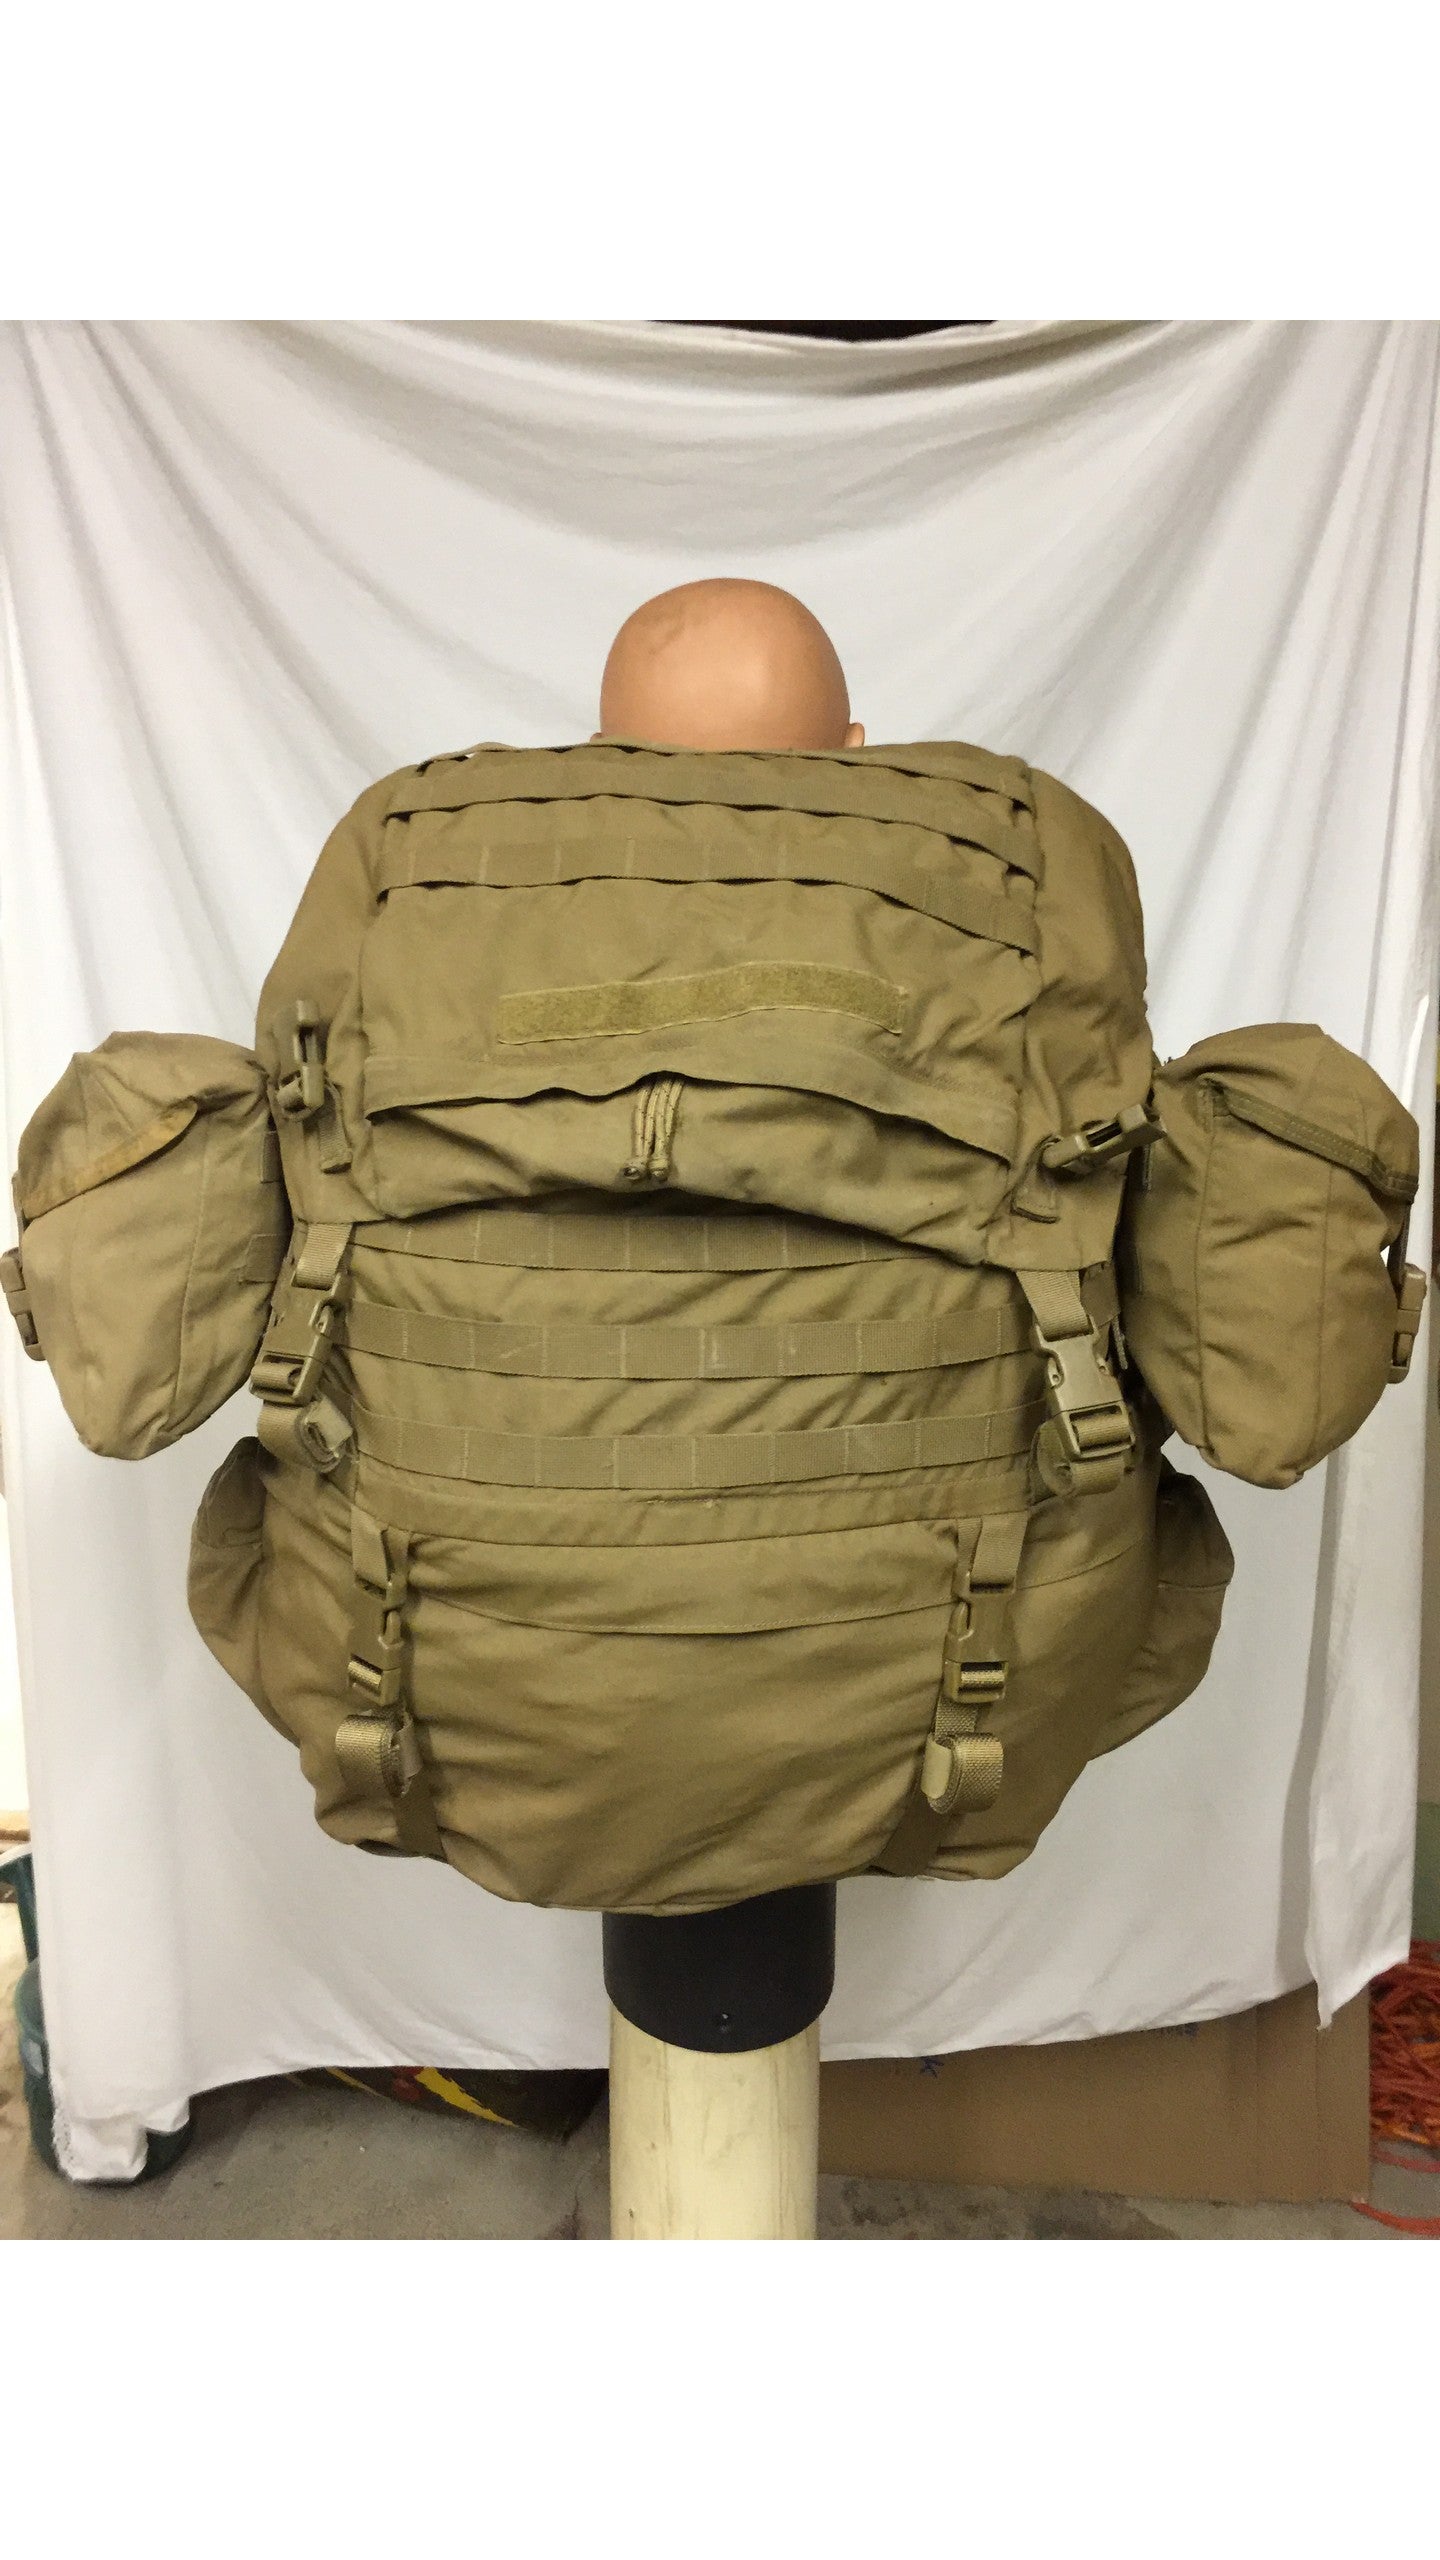 USMC Assault Pack FILBE Hip Belt/Kidney Pad, Provides Stability and  Support, Coyote, Used, Made in USA